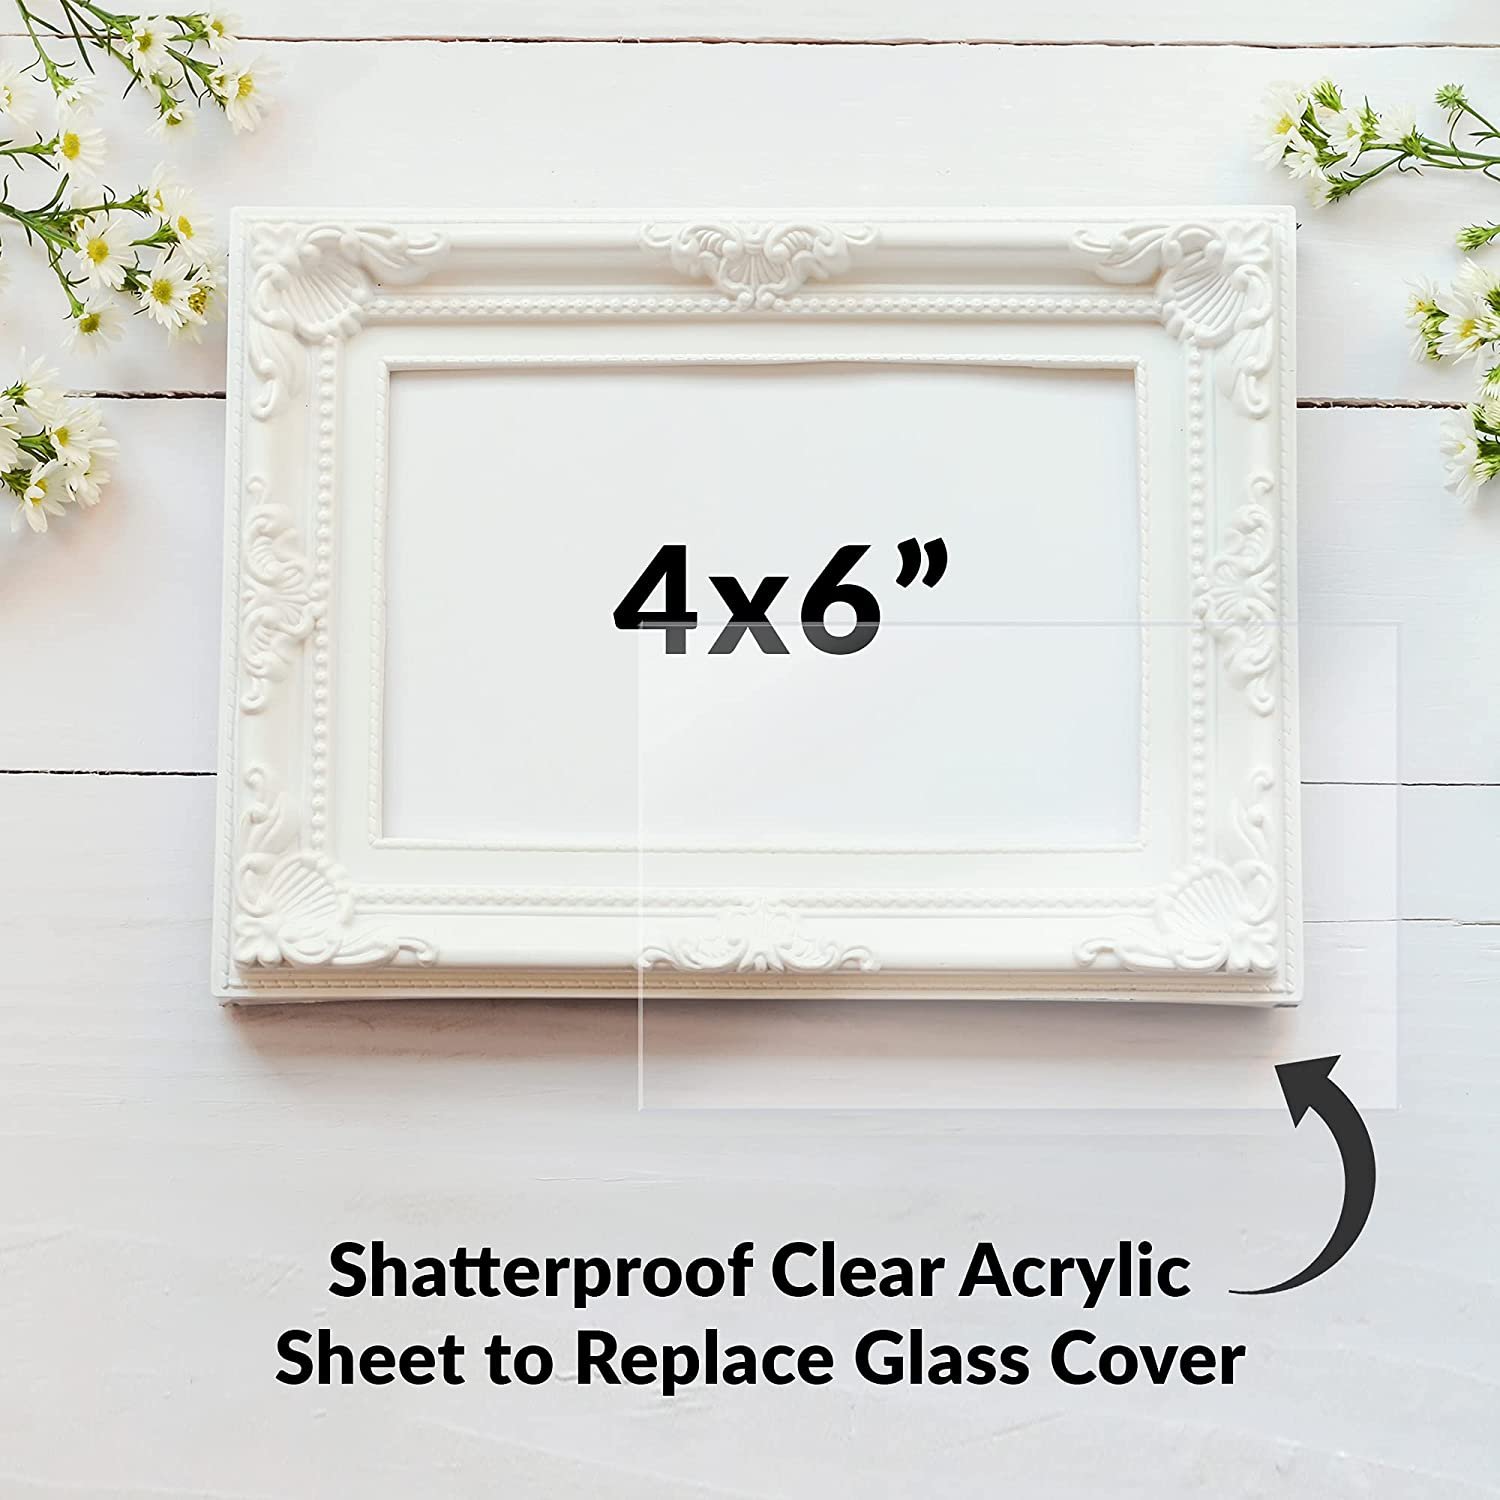 SimbaLux Acrylic Sheet Clear 4 x 6 Panel 0.04 Thick 1mm Plexiglass Board, Easy to Cut, Pack of 10